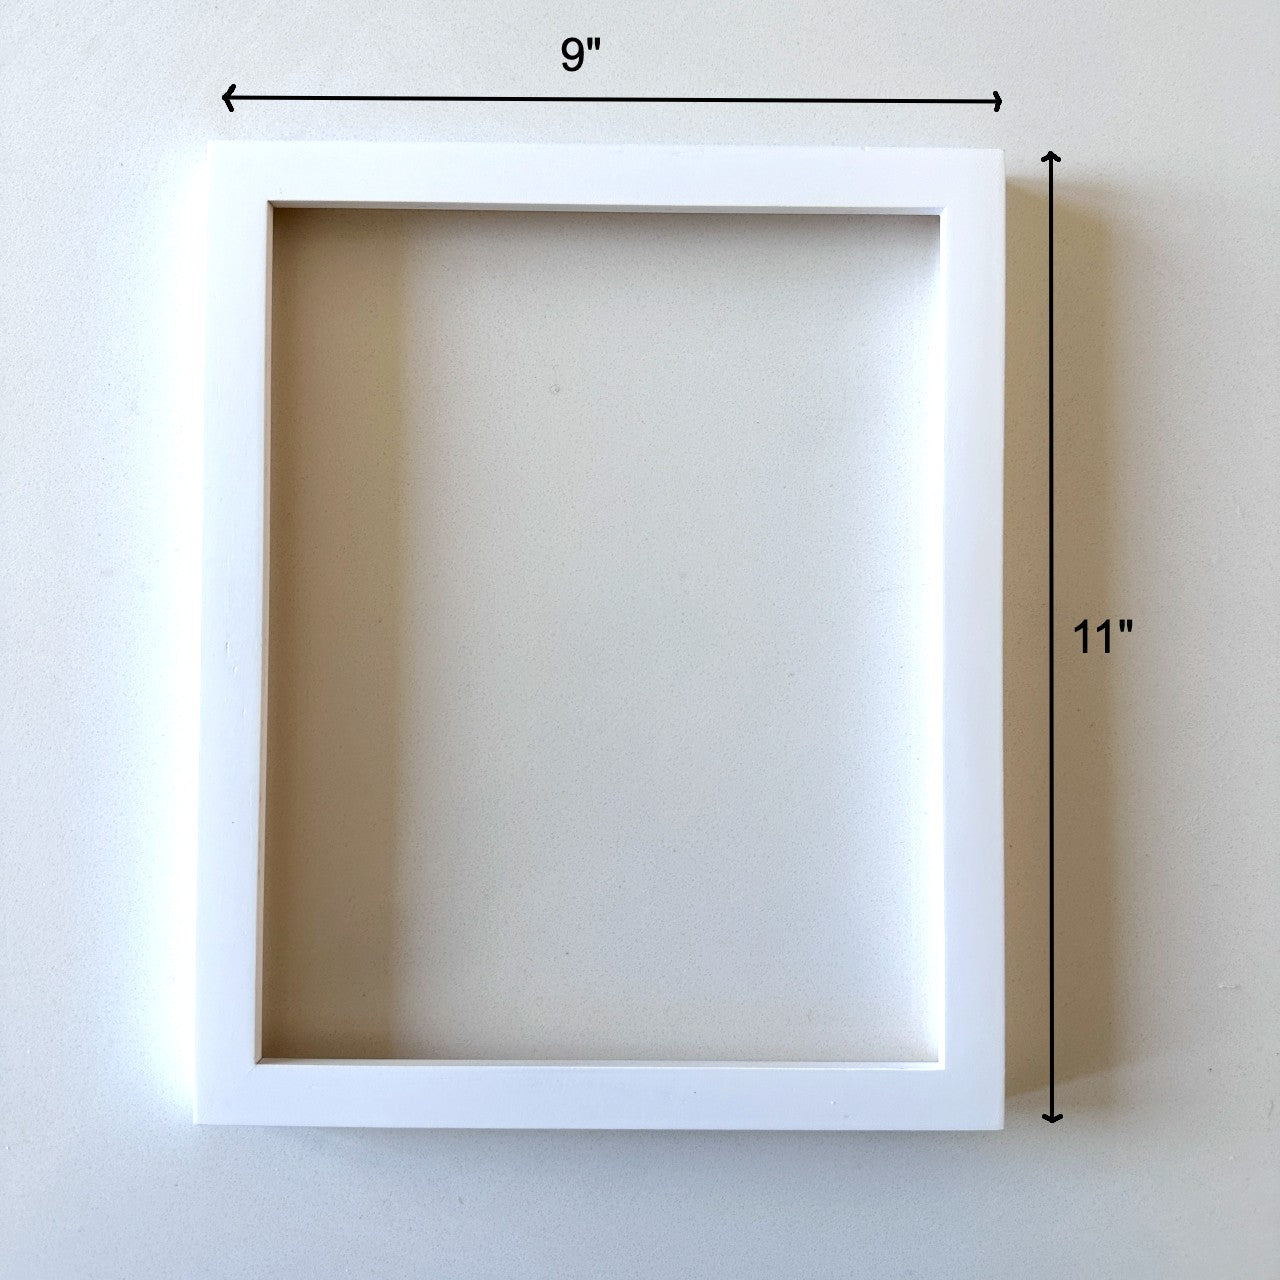 NEW! Punch Needle Tabletop Frame in Two Sizes - Rectangle or Square - Free  US Shipping